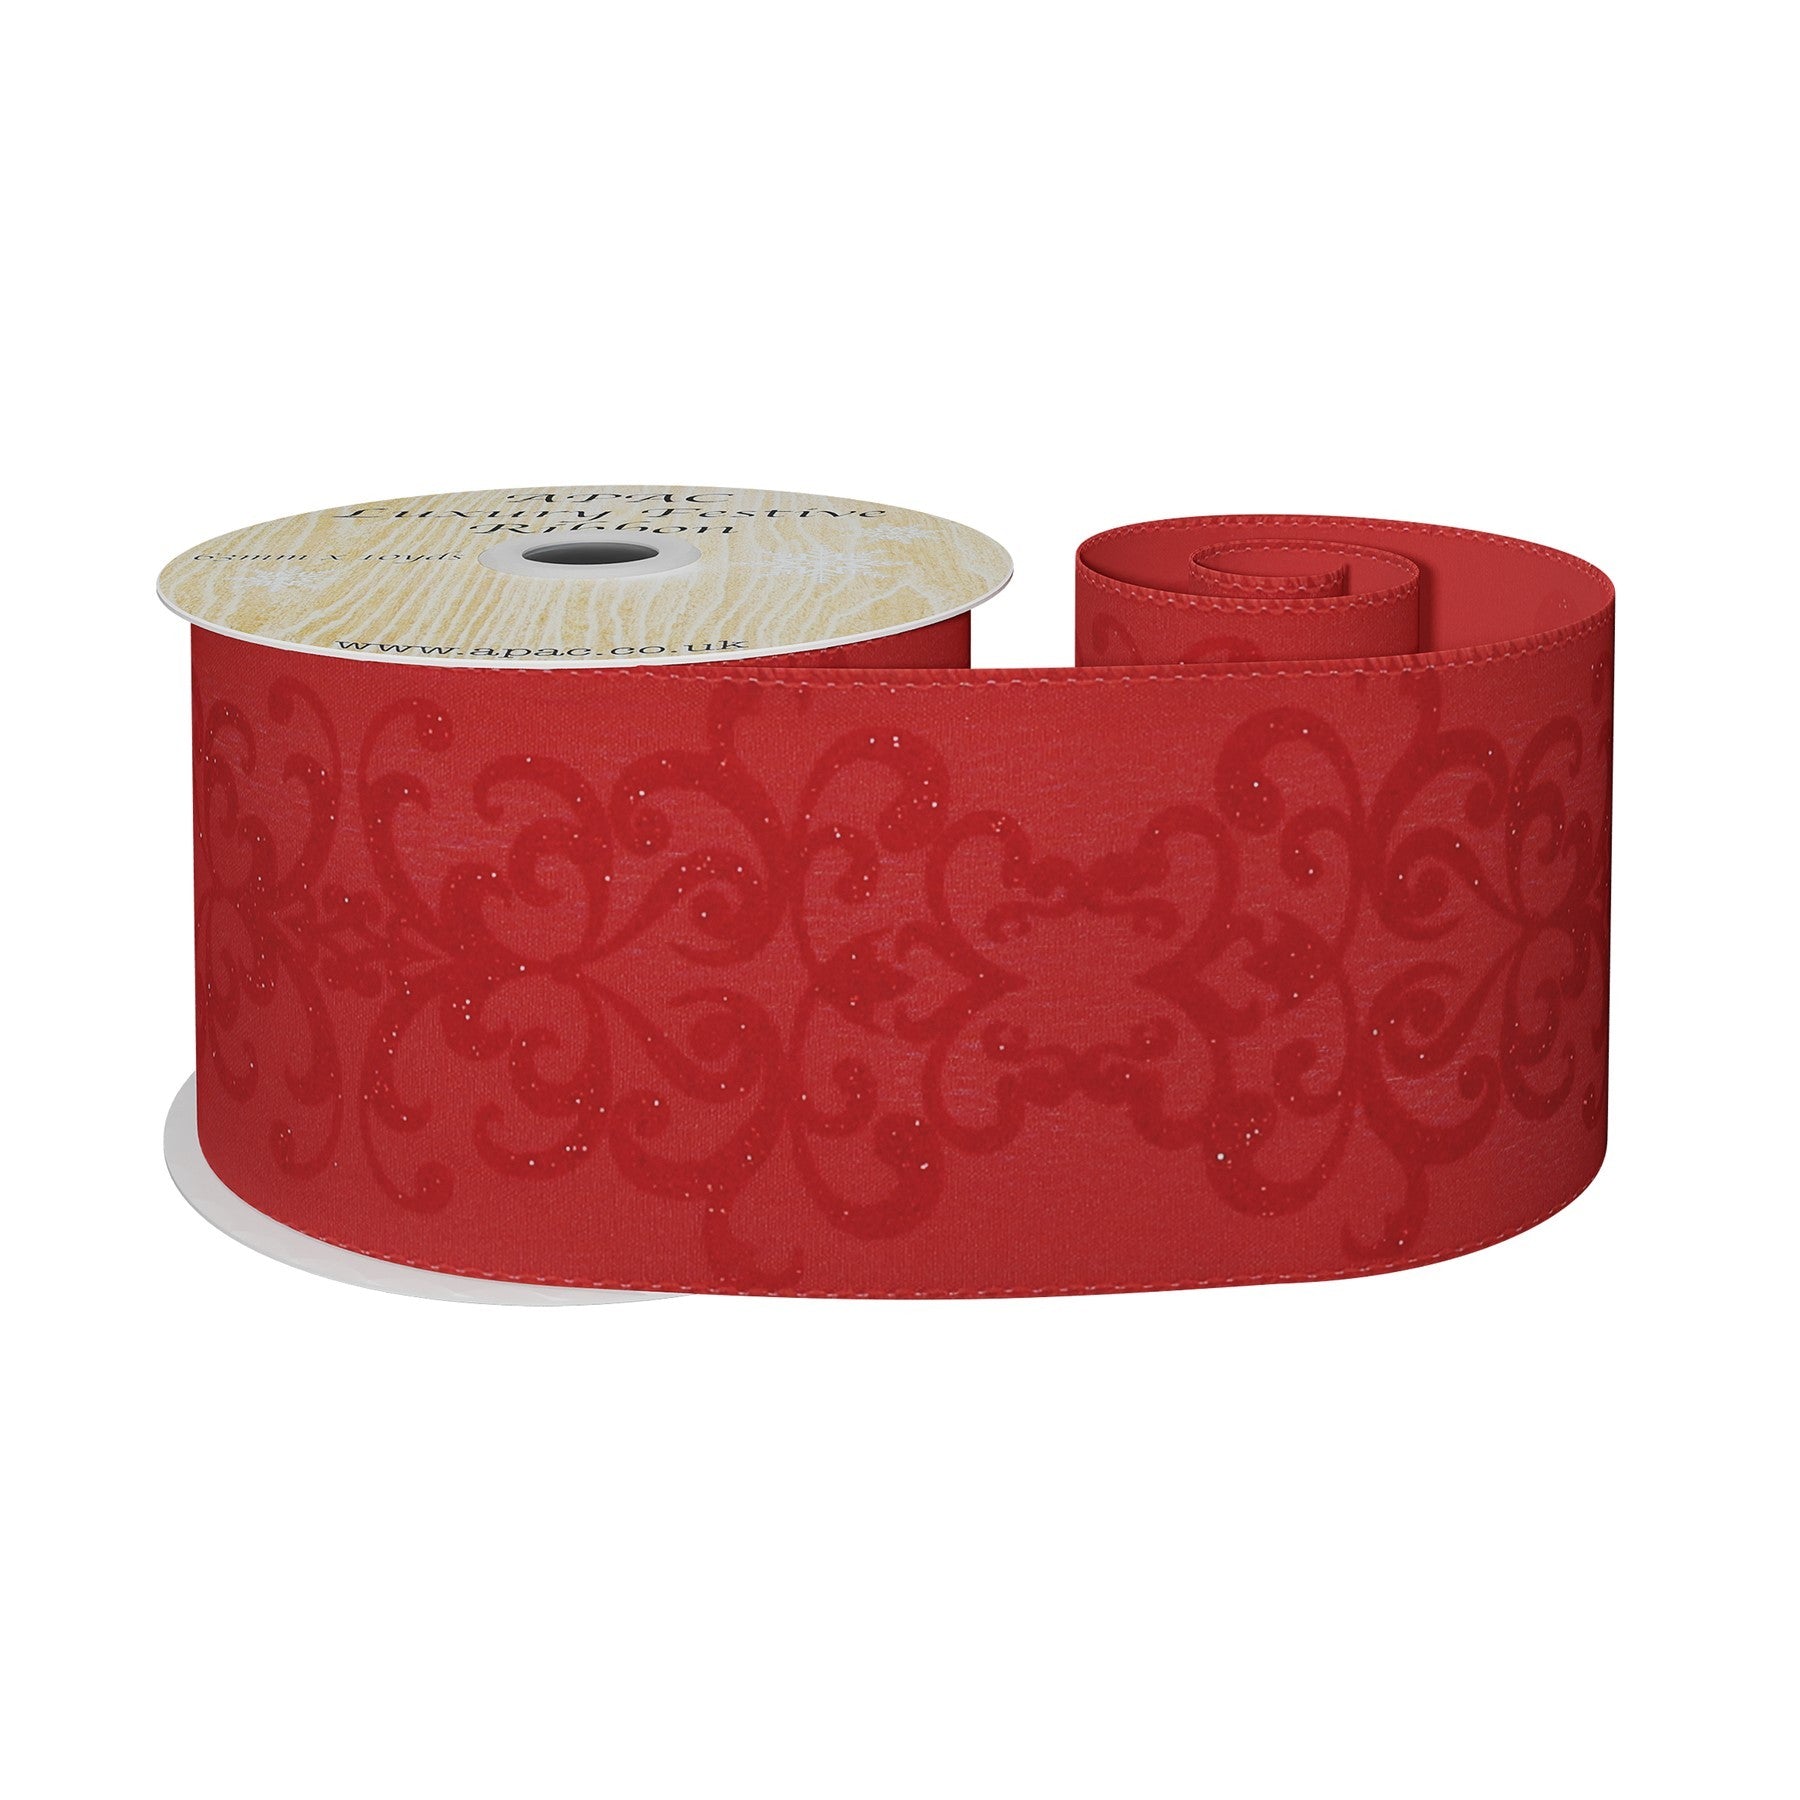 View Red Wired Ribbon with Flocked Pattern 63mm x 10 yards information